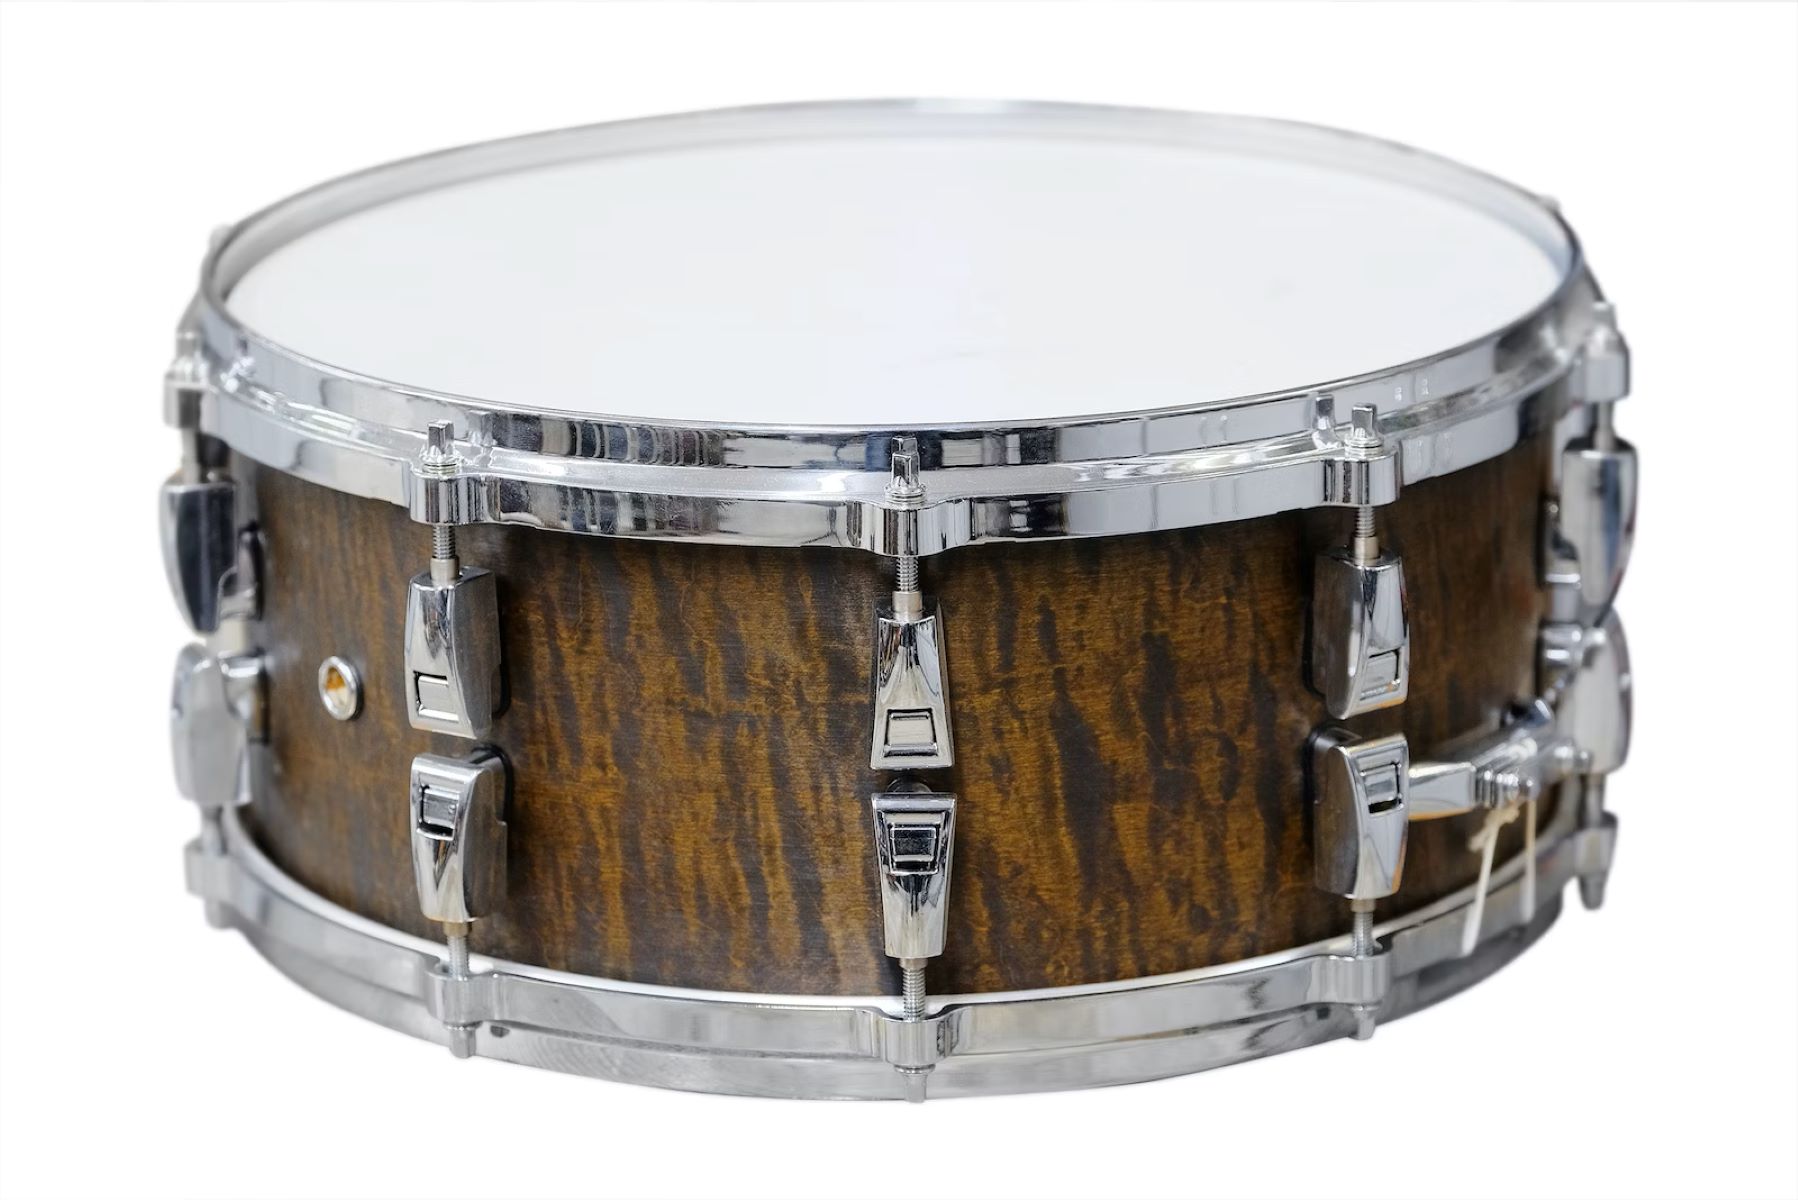 What Are Snare Drums Made Of